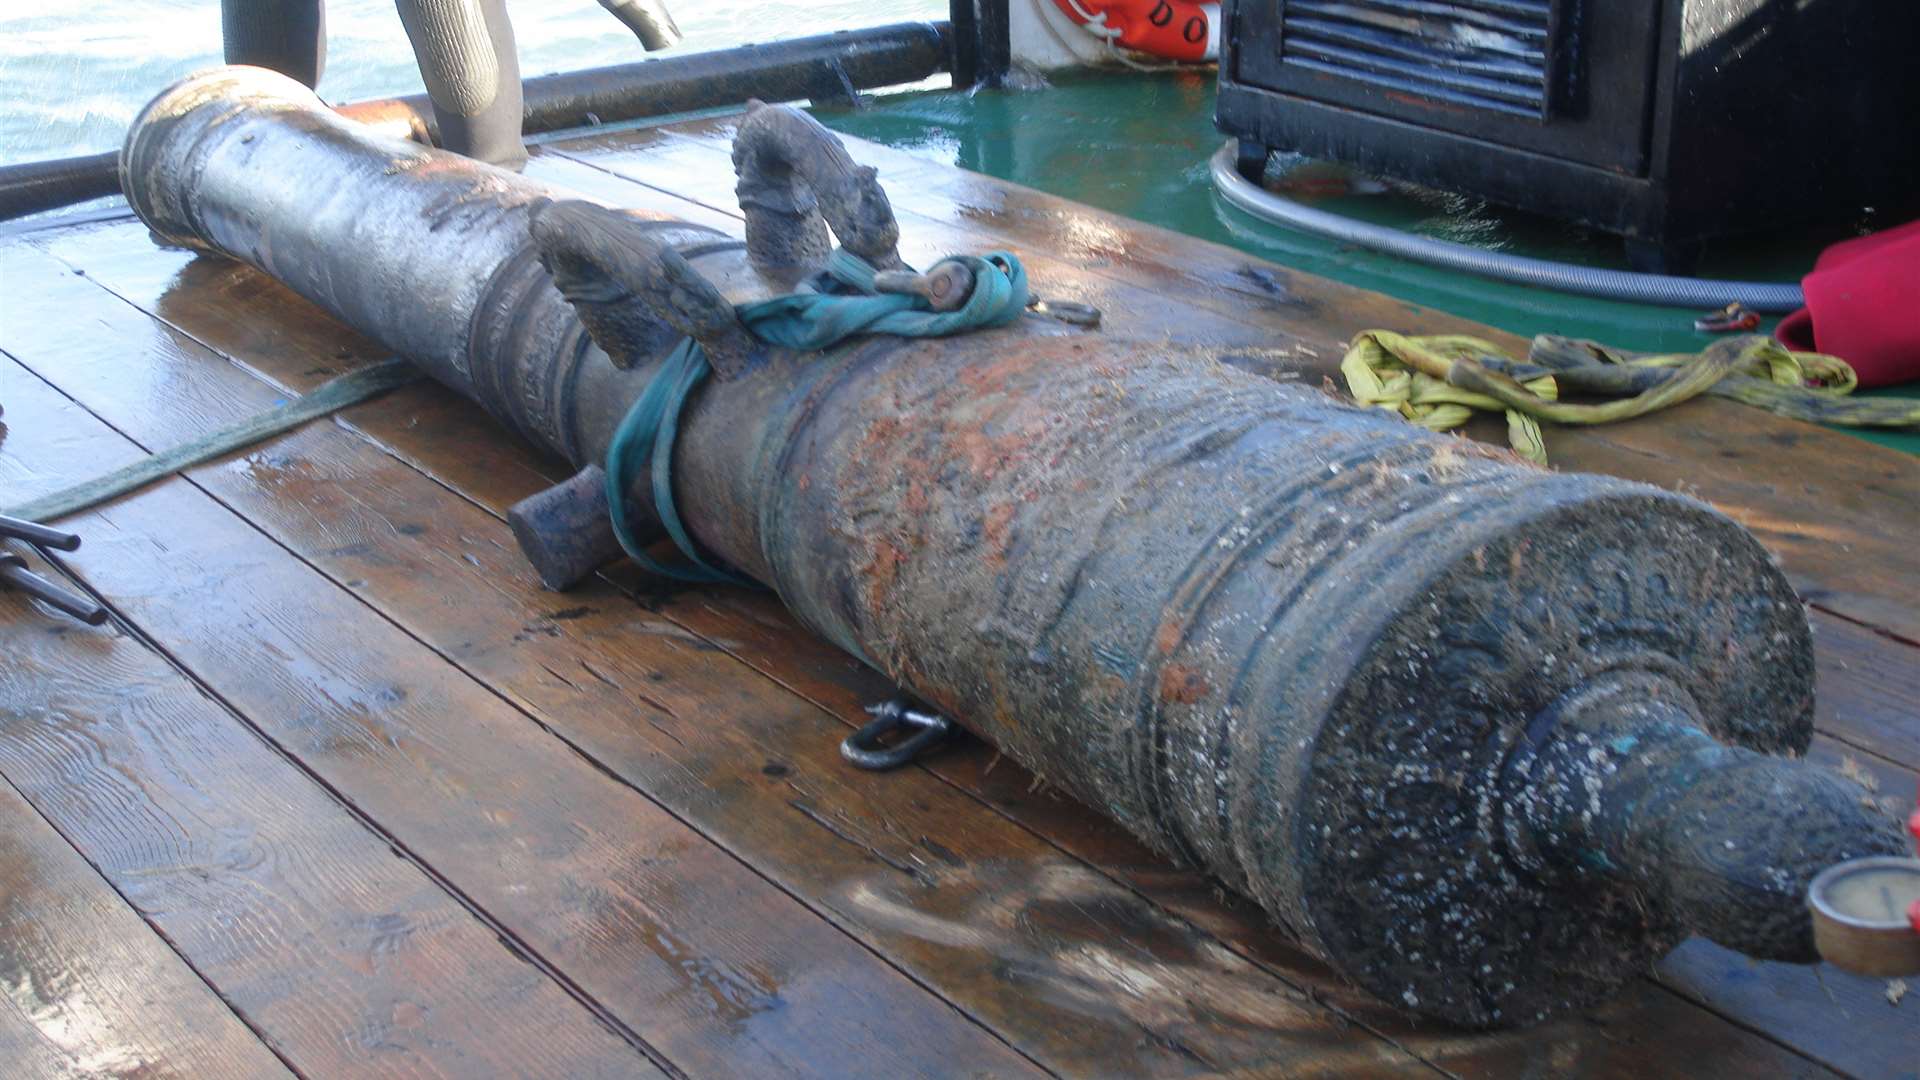 One of the cannon found